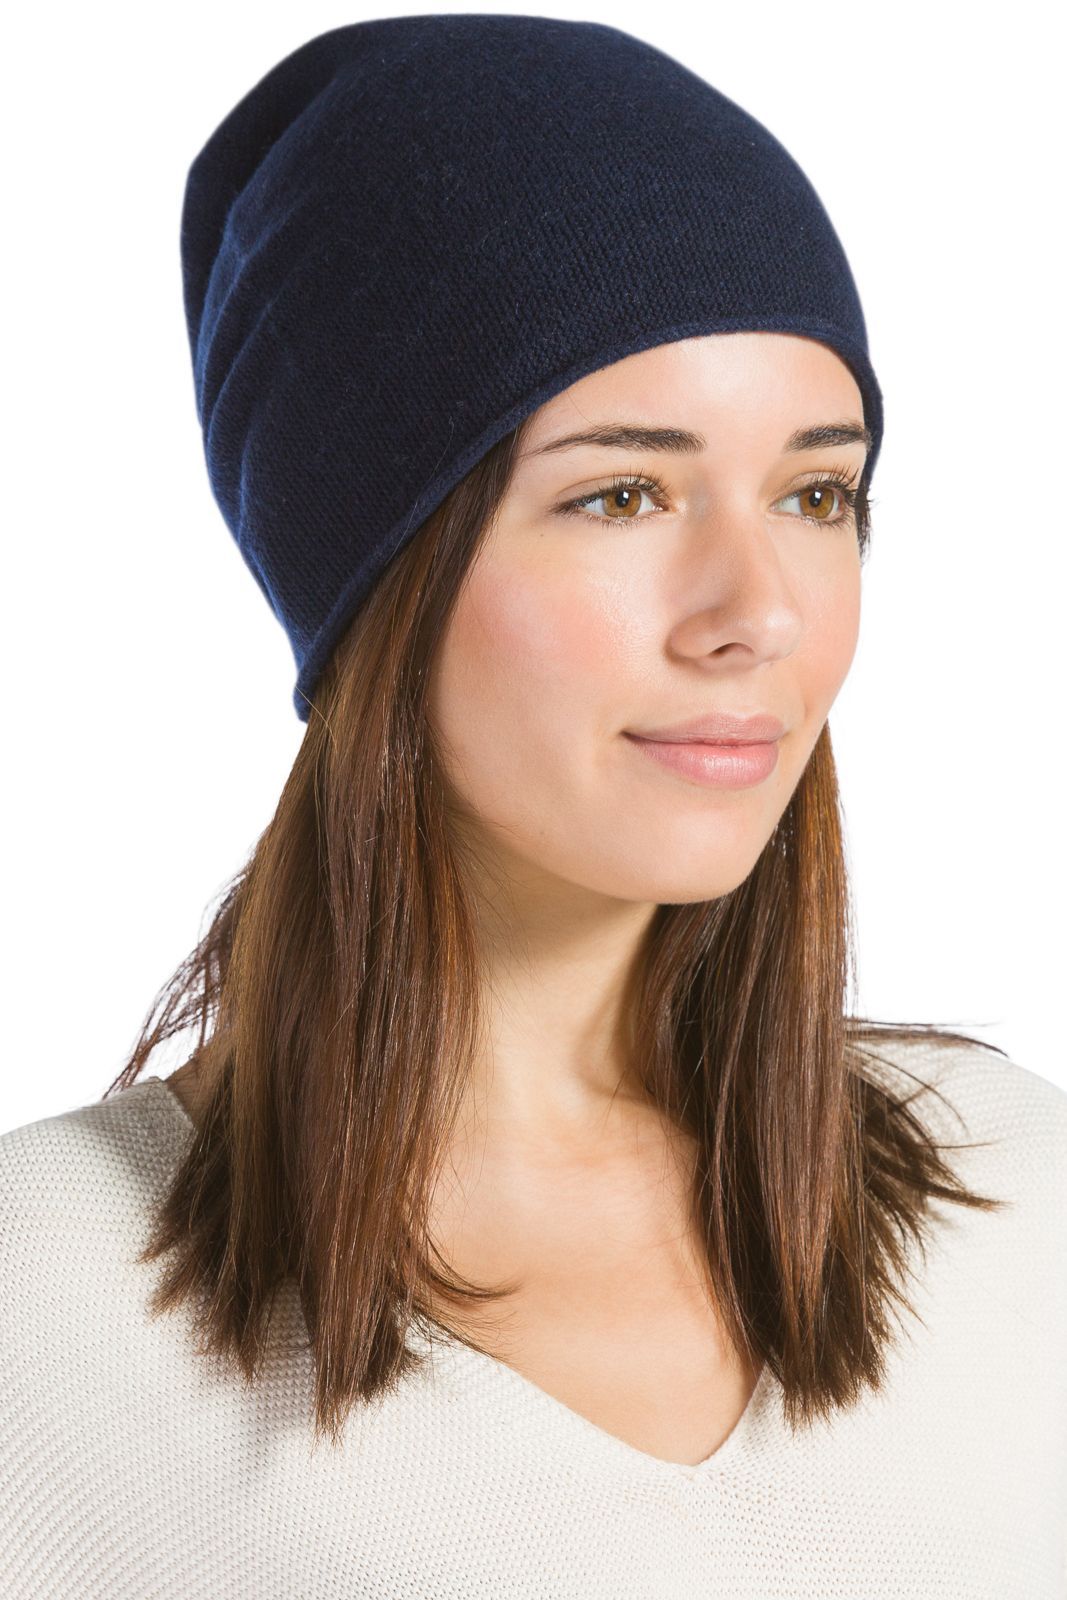 Women's 100% Cashmere Slouchy Beanie Hat Womens>Accessories>Hat Fishers Finery Navy One Size Fits Most 